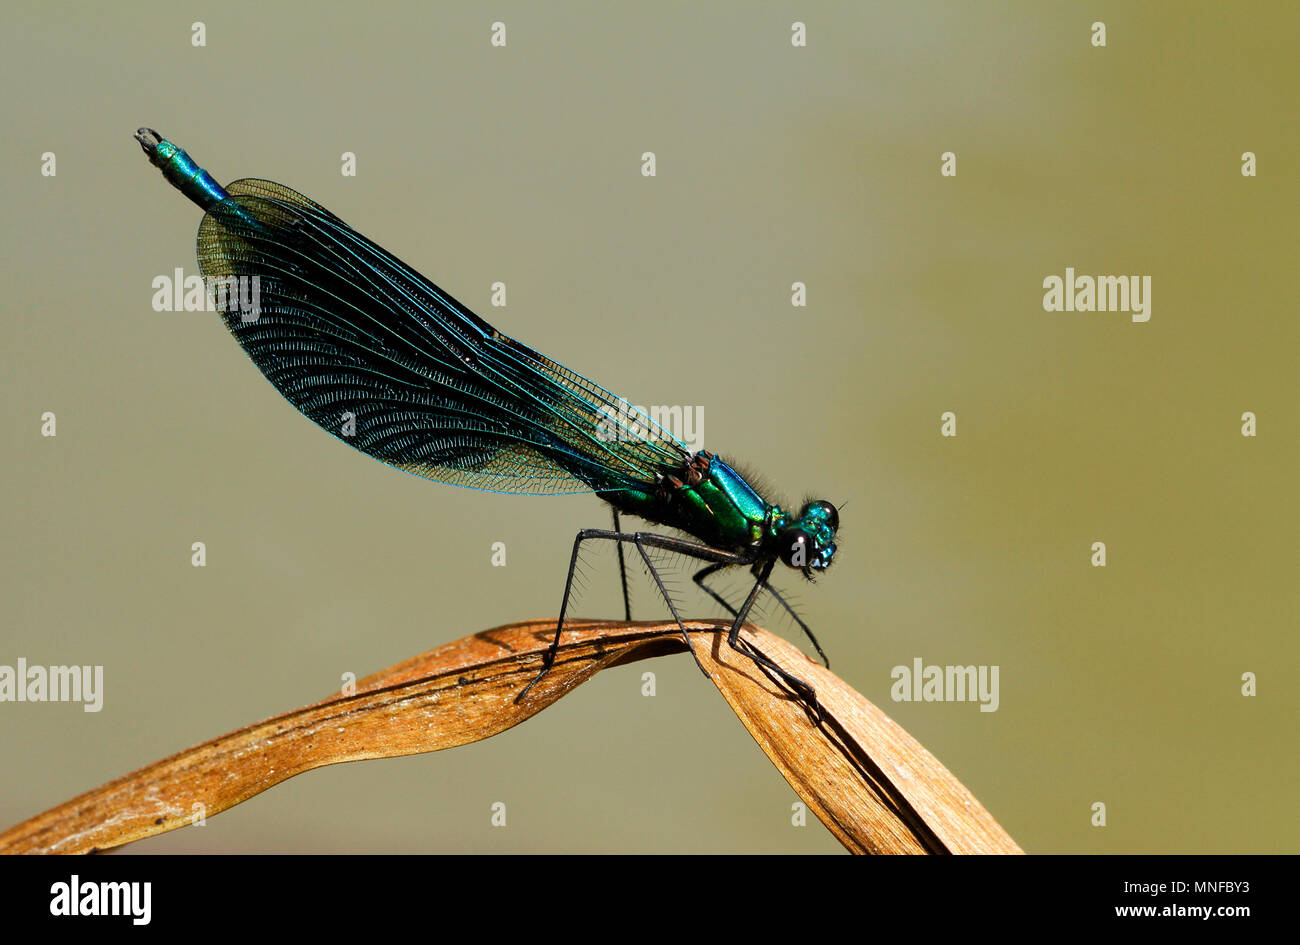 Male Banded demoiselle, Calopteryx splendens, resting on a blade of grass in Finland. Stock Photo